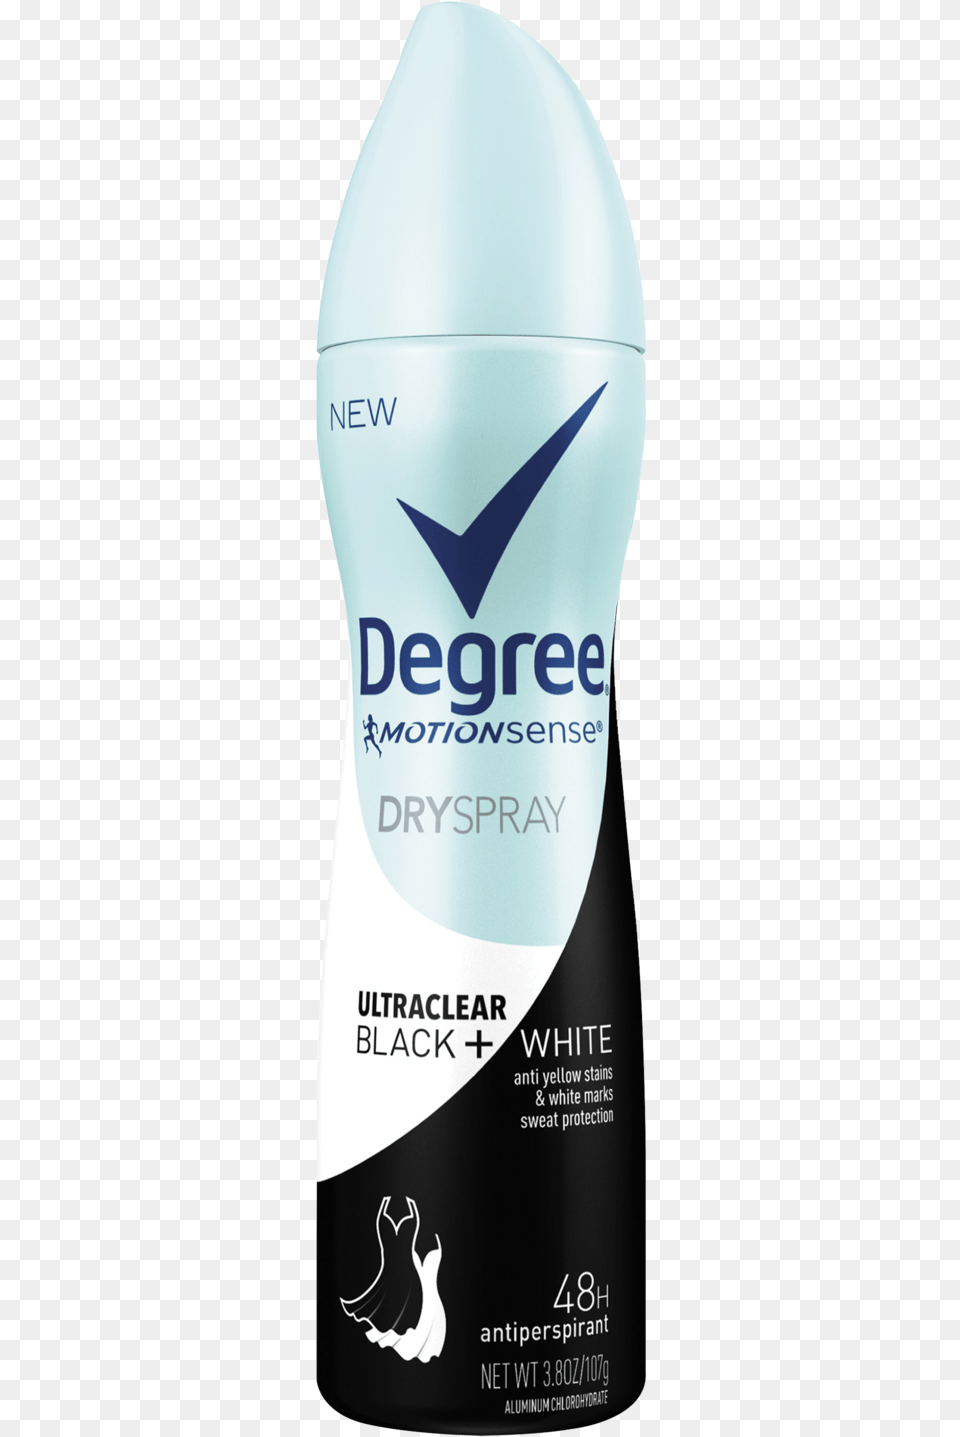 Deodorant Degree Spray Deodorant Black And White, Cosmetics, Can, Tin Png